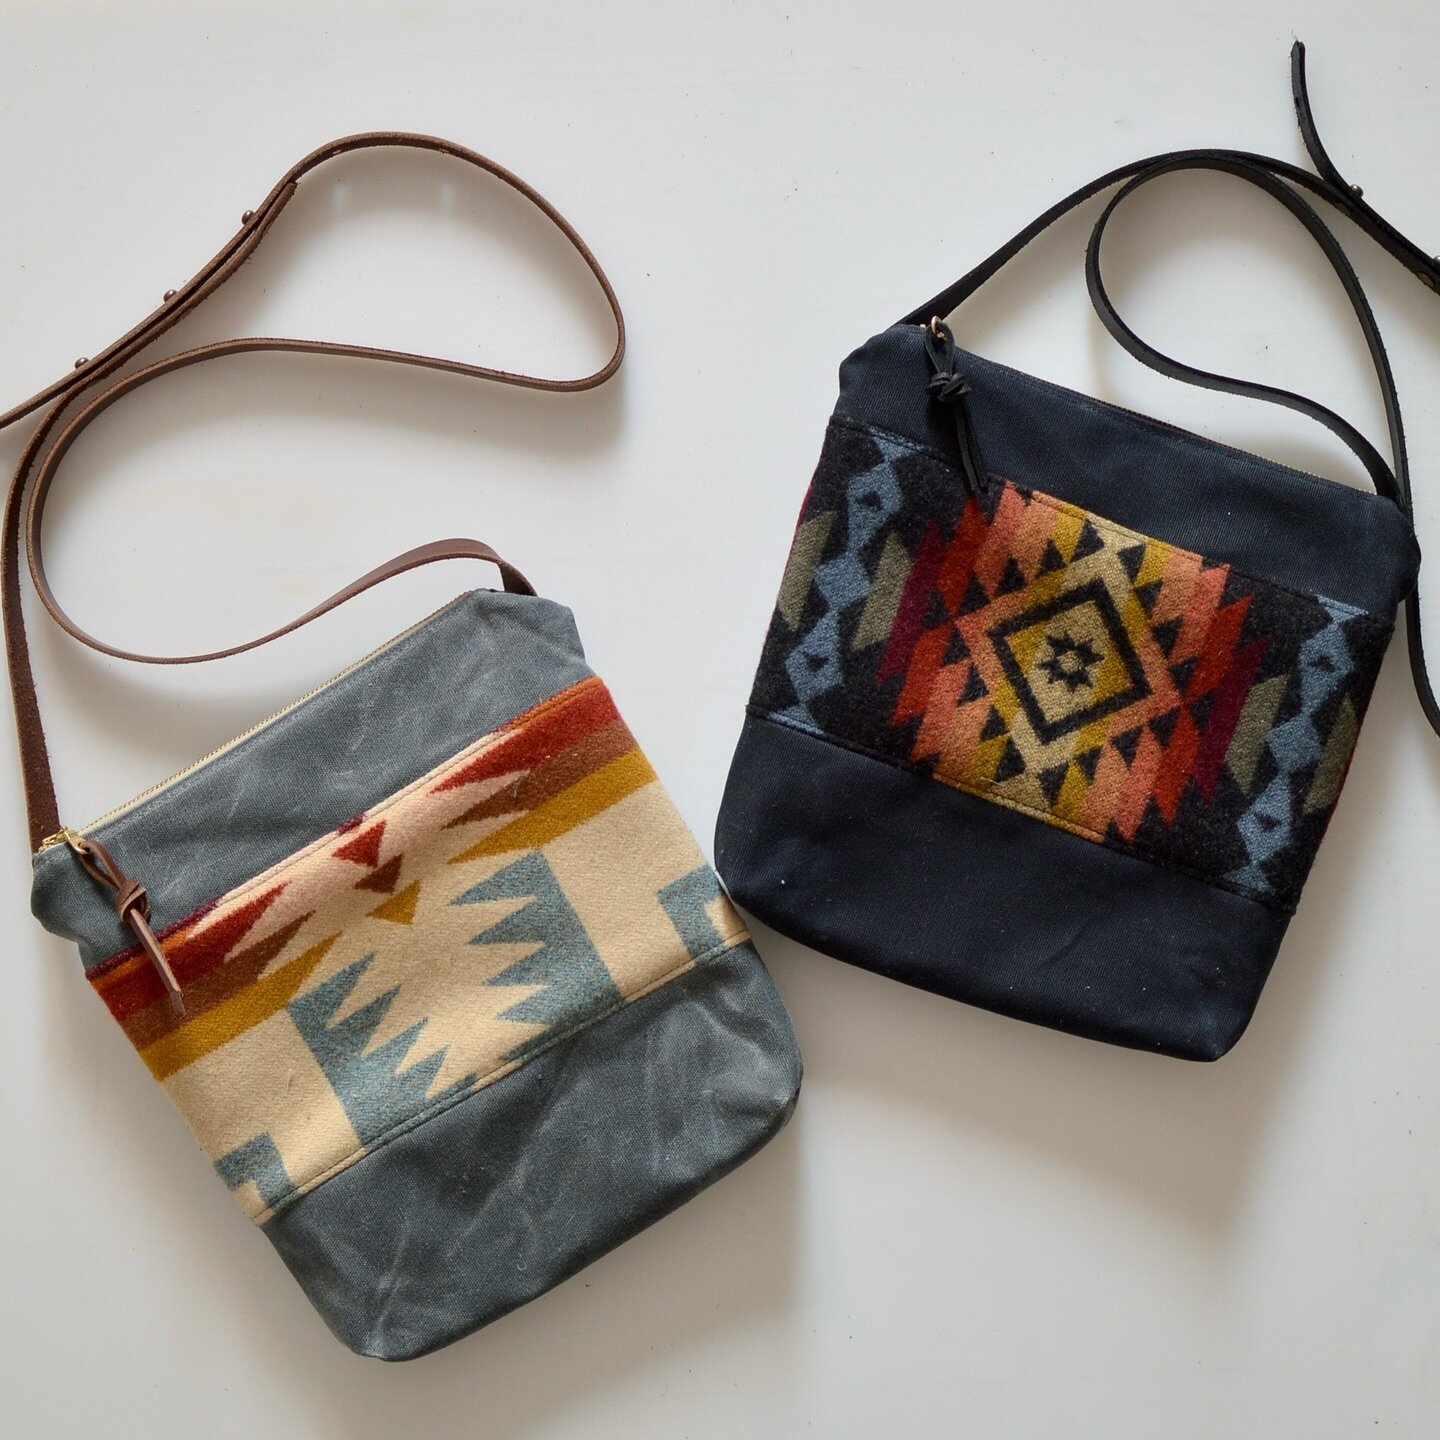 A couple of custom orders I just finished up. I always forget about the black waved canvas but I&rsquo;m going to make more now! 
.
February&rsquo;s shop update will be leather bottom bags. It&rsquo;s been about a year since I first made them. So I o